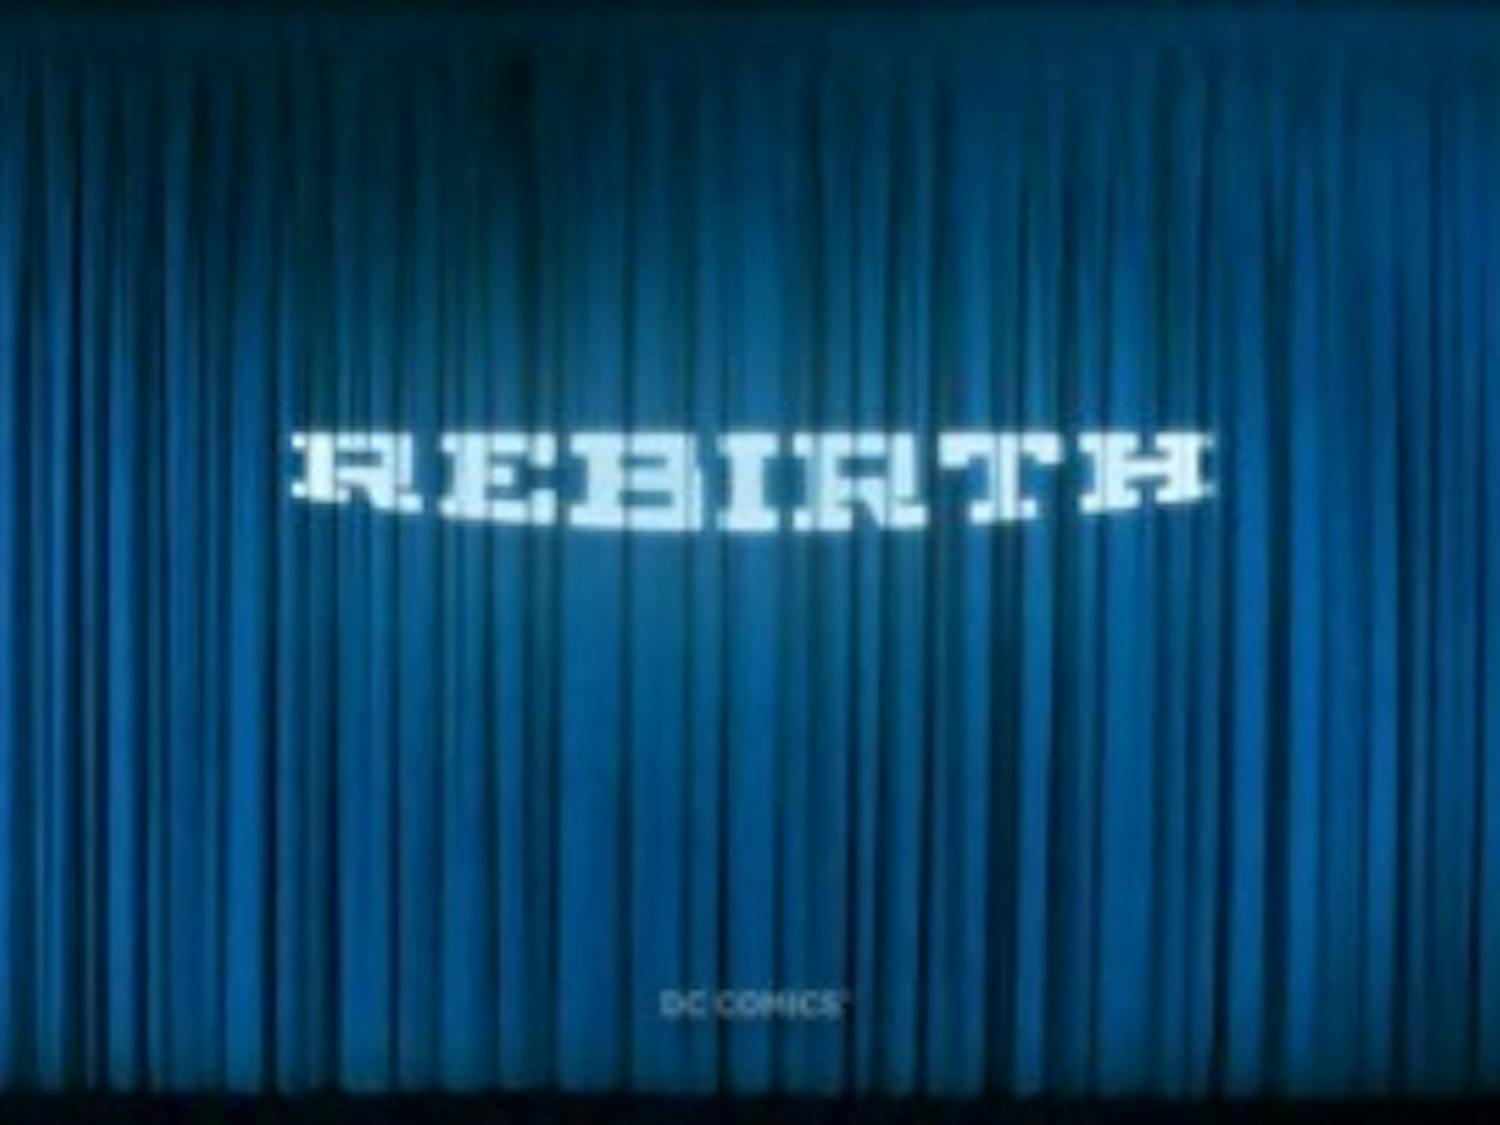 "Rebirth" will not just be a reboot of the old comics, but rather it will incorporate new elements into worlds familiar to the readers.